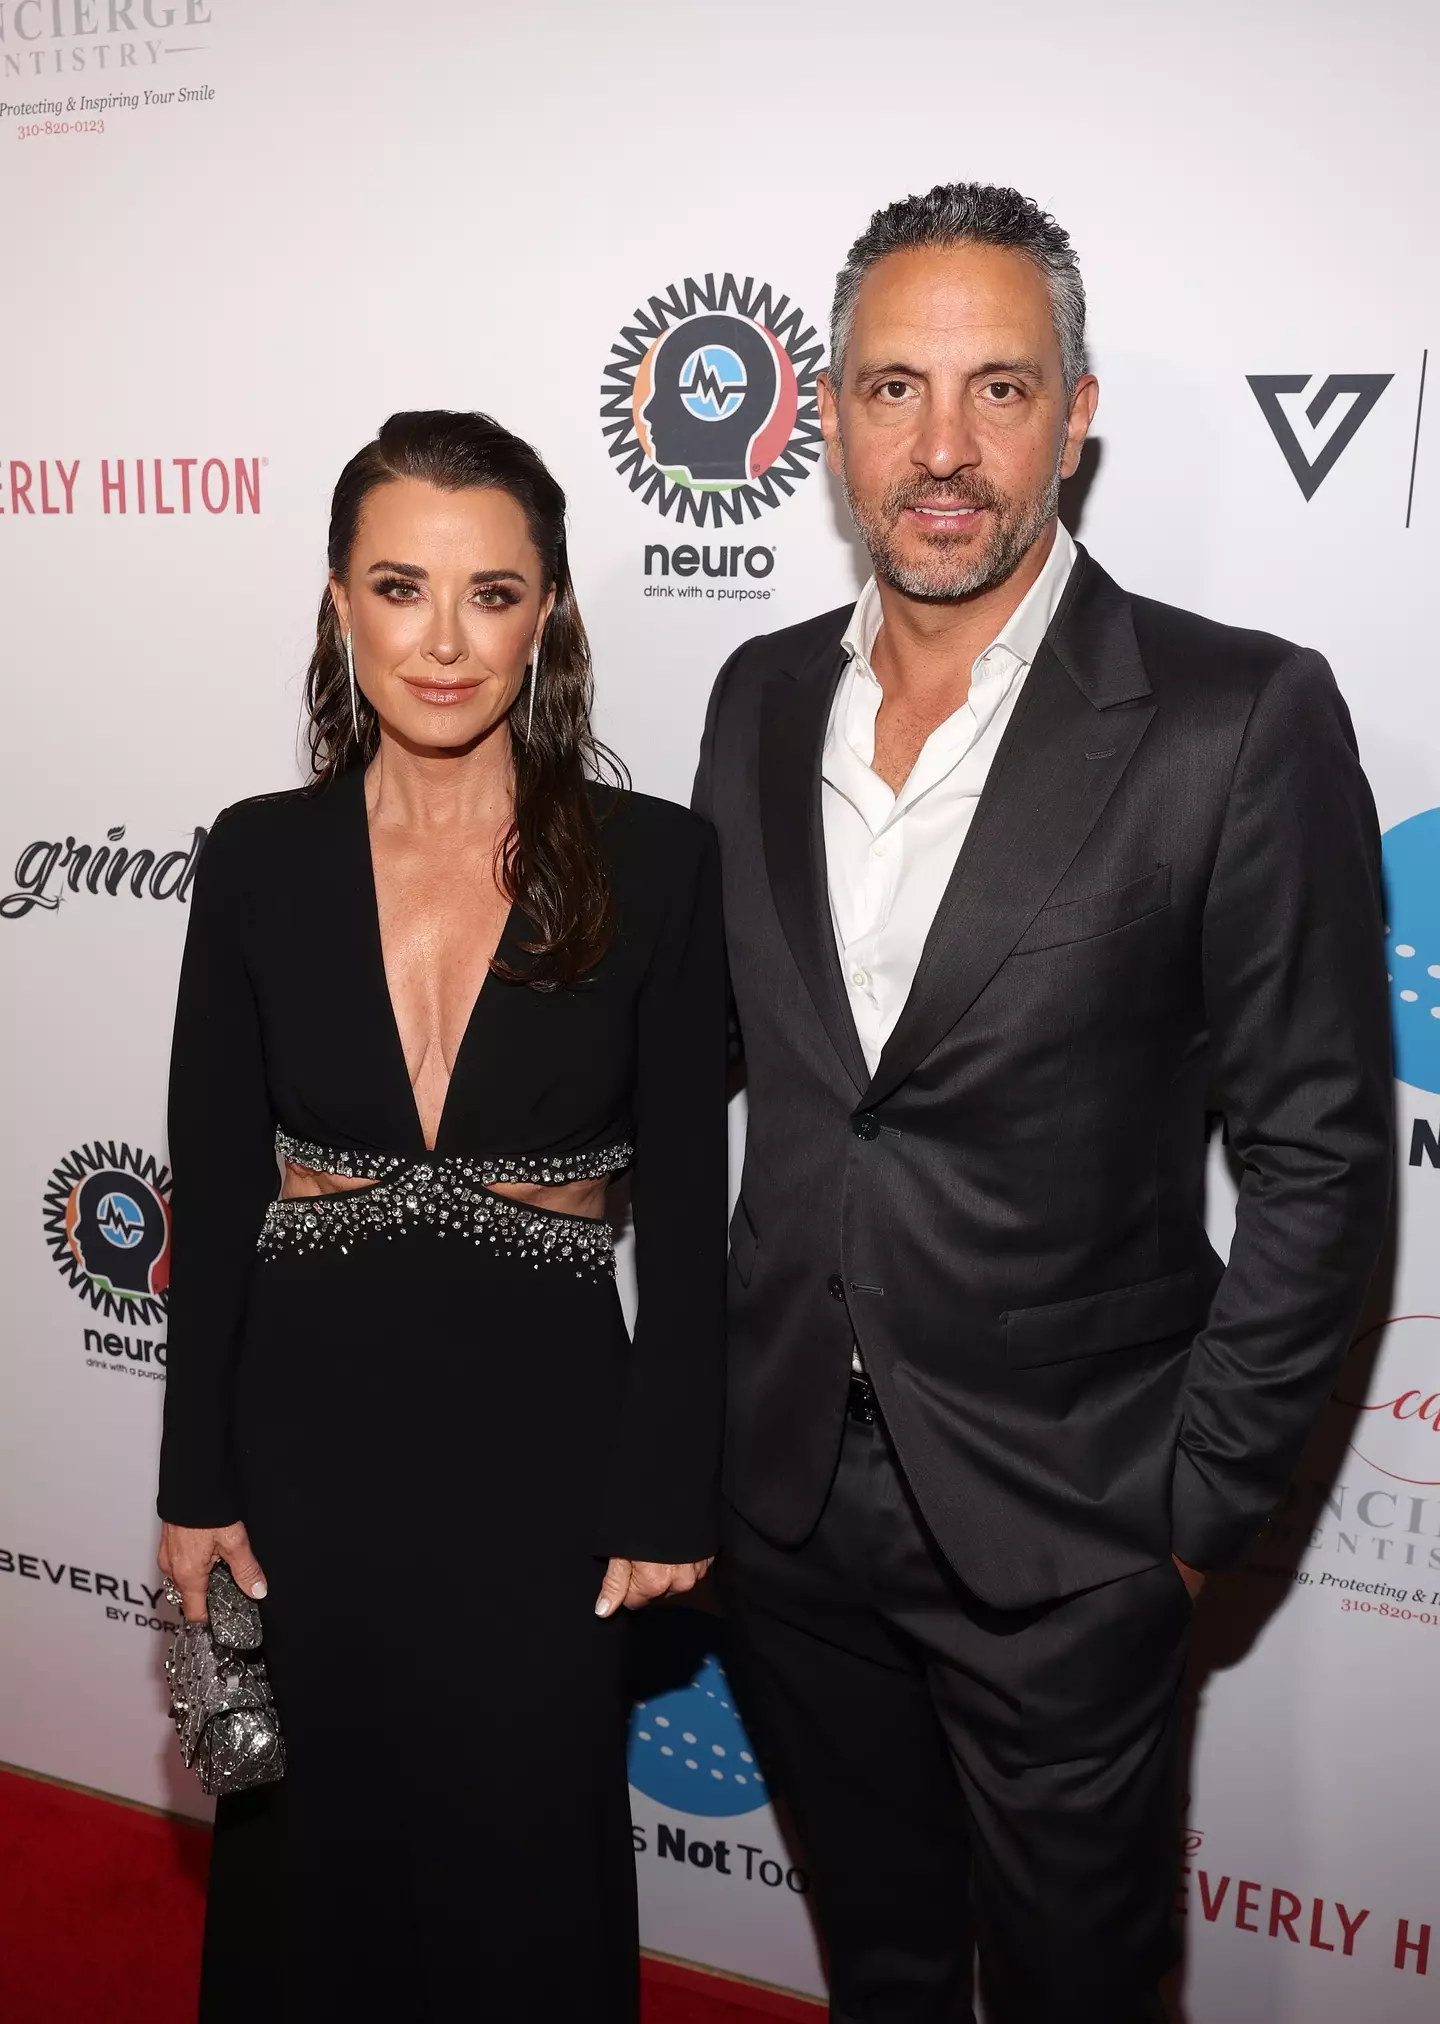 Real Housewives of Beverly Hills star Kyle Richards has responded to the separation rumours.